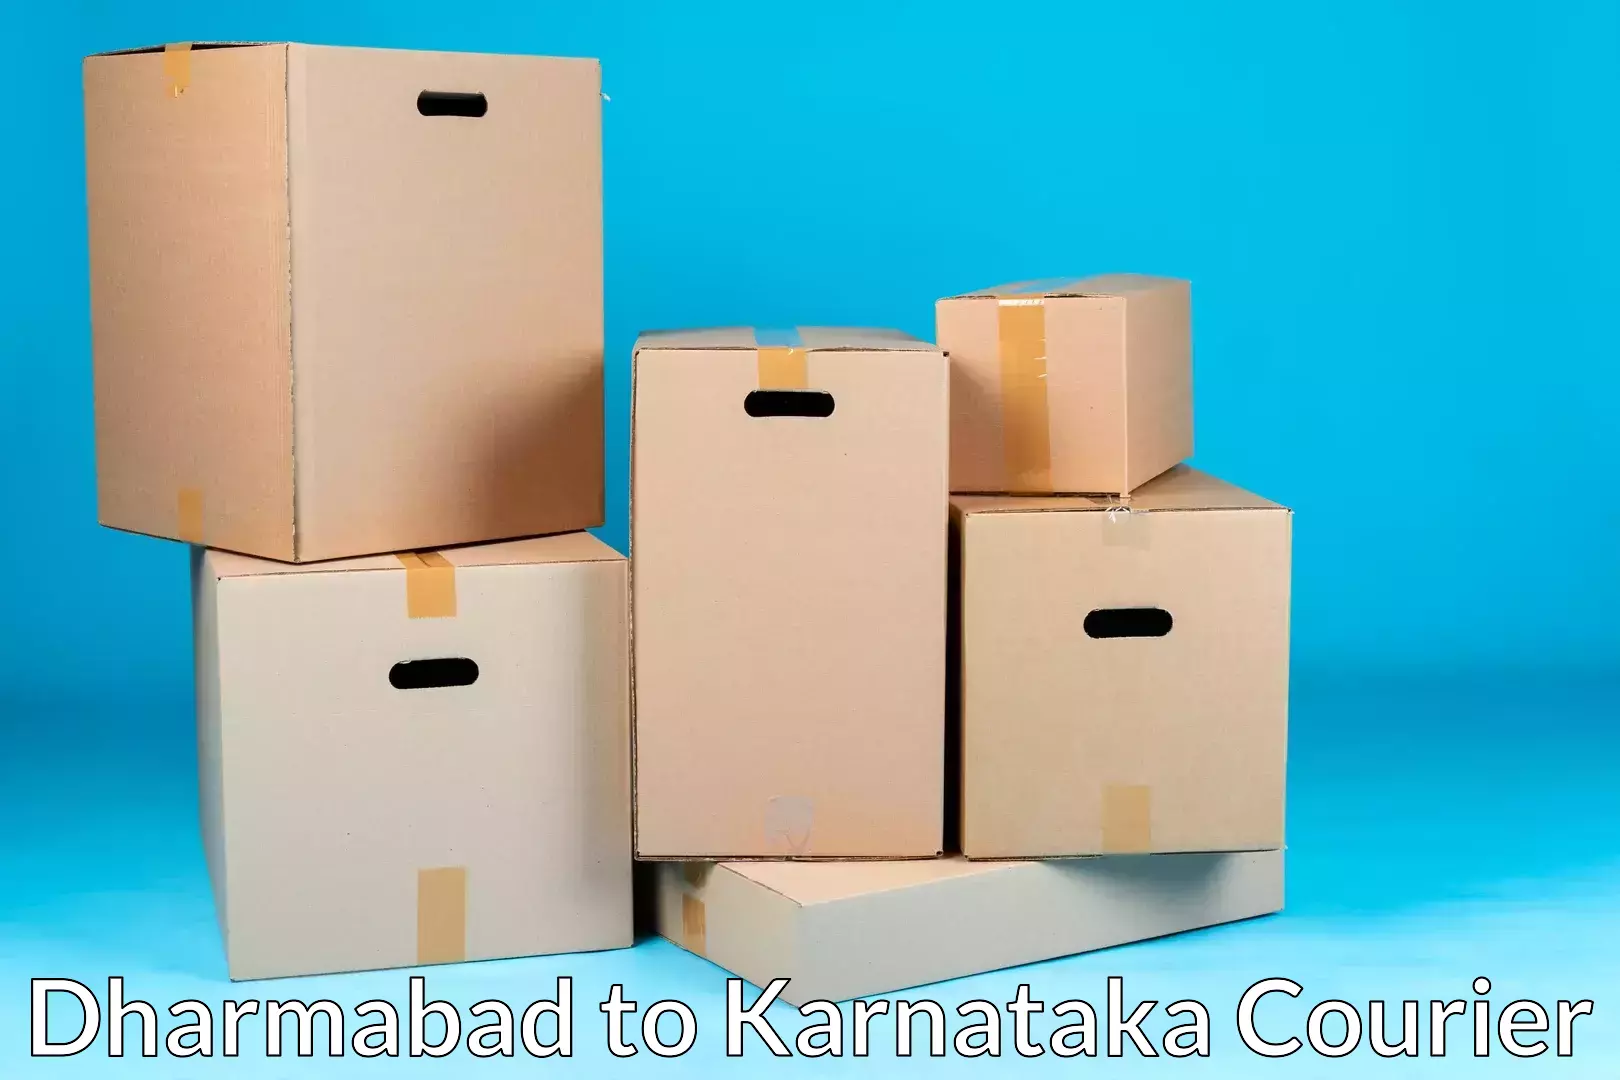 Furniture relocation experts Dharmabad to Siruguppa